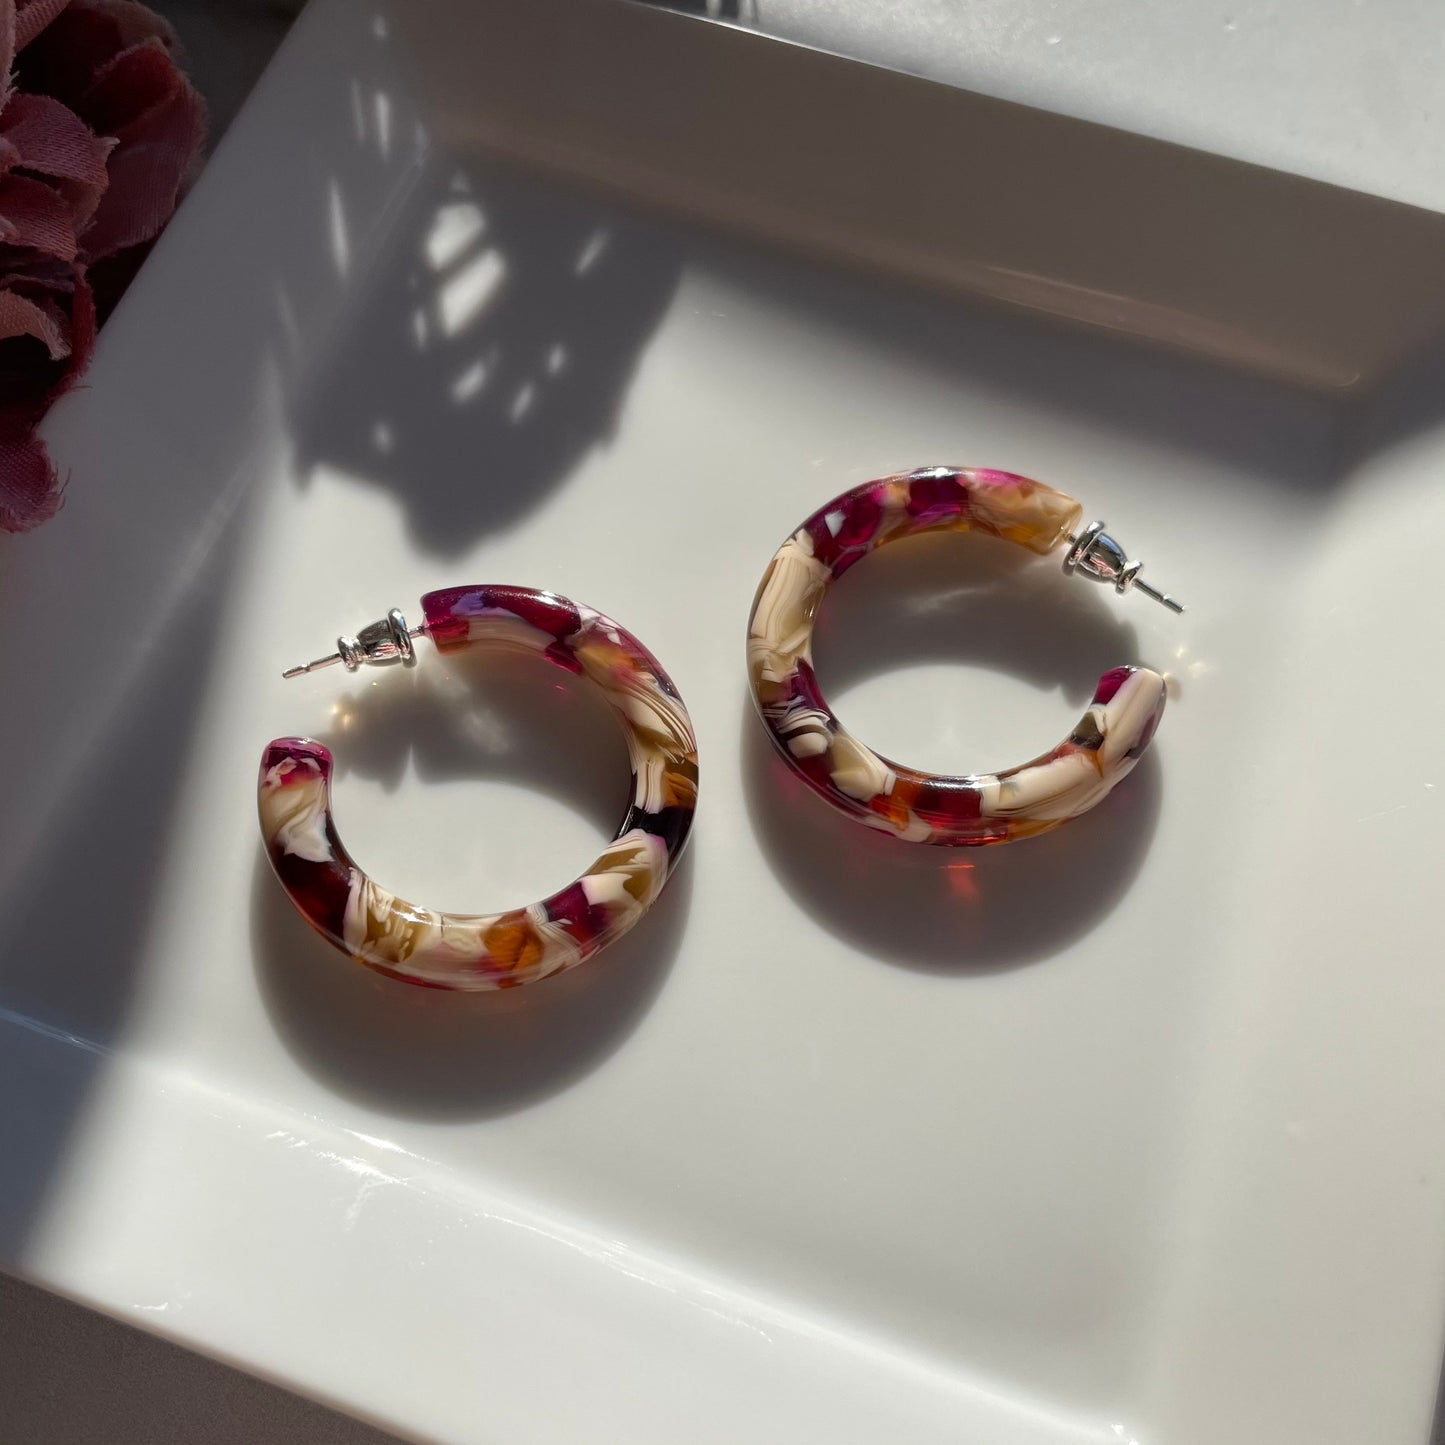 35mm Round Hoops in Autumn | Floral Red Cream Acetate Tortoise Shell Hoop Earrings 925 Sterling Silver Posts